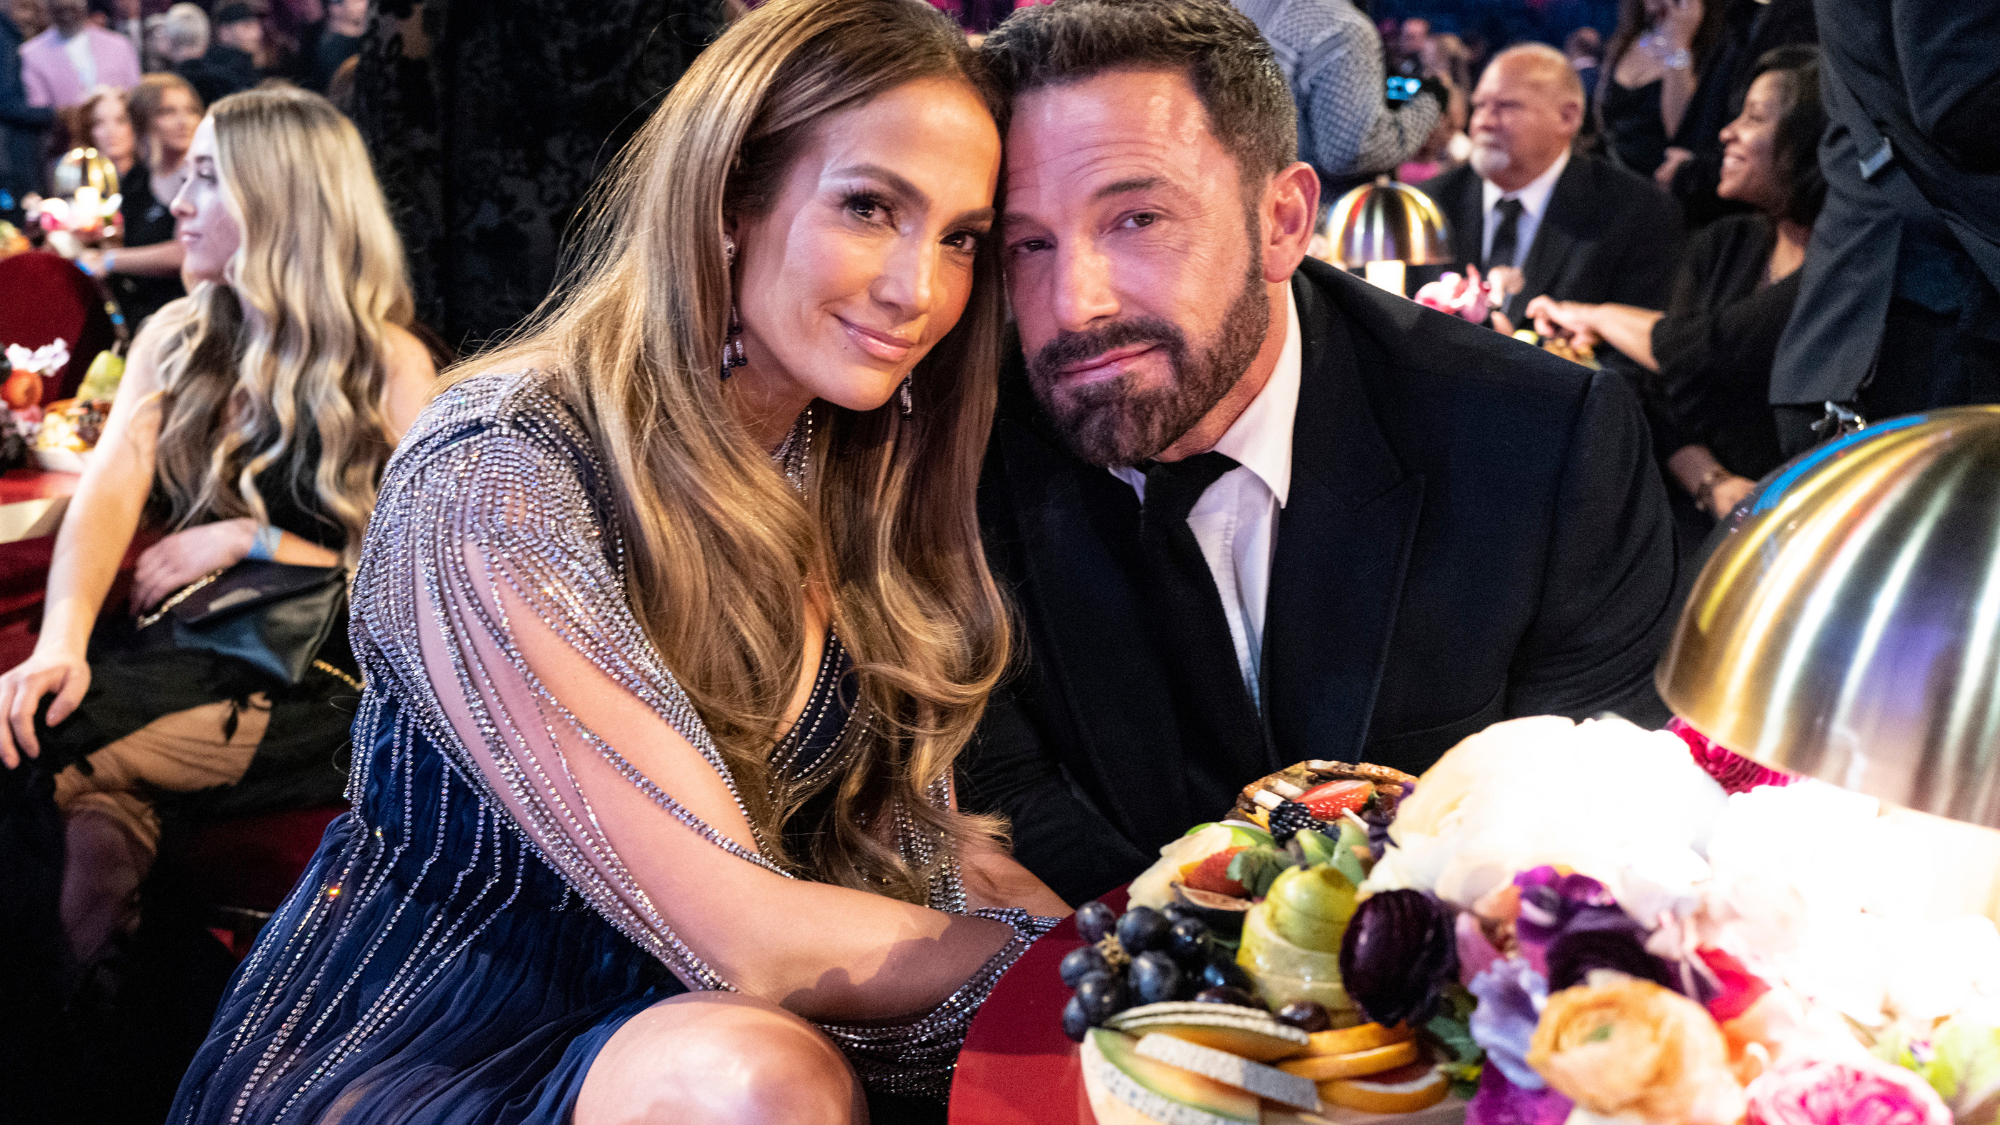 Lip Reader Claims Jennifer Lopez Told Ben Affleck to "Look More Friendly" at the Grammys